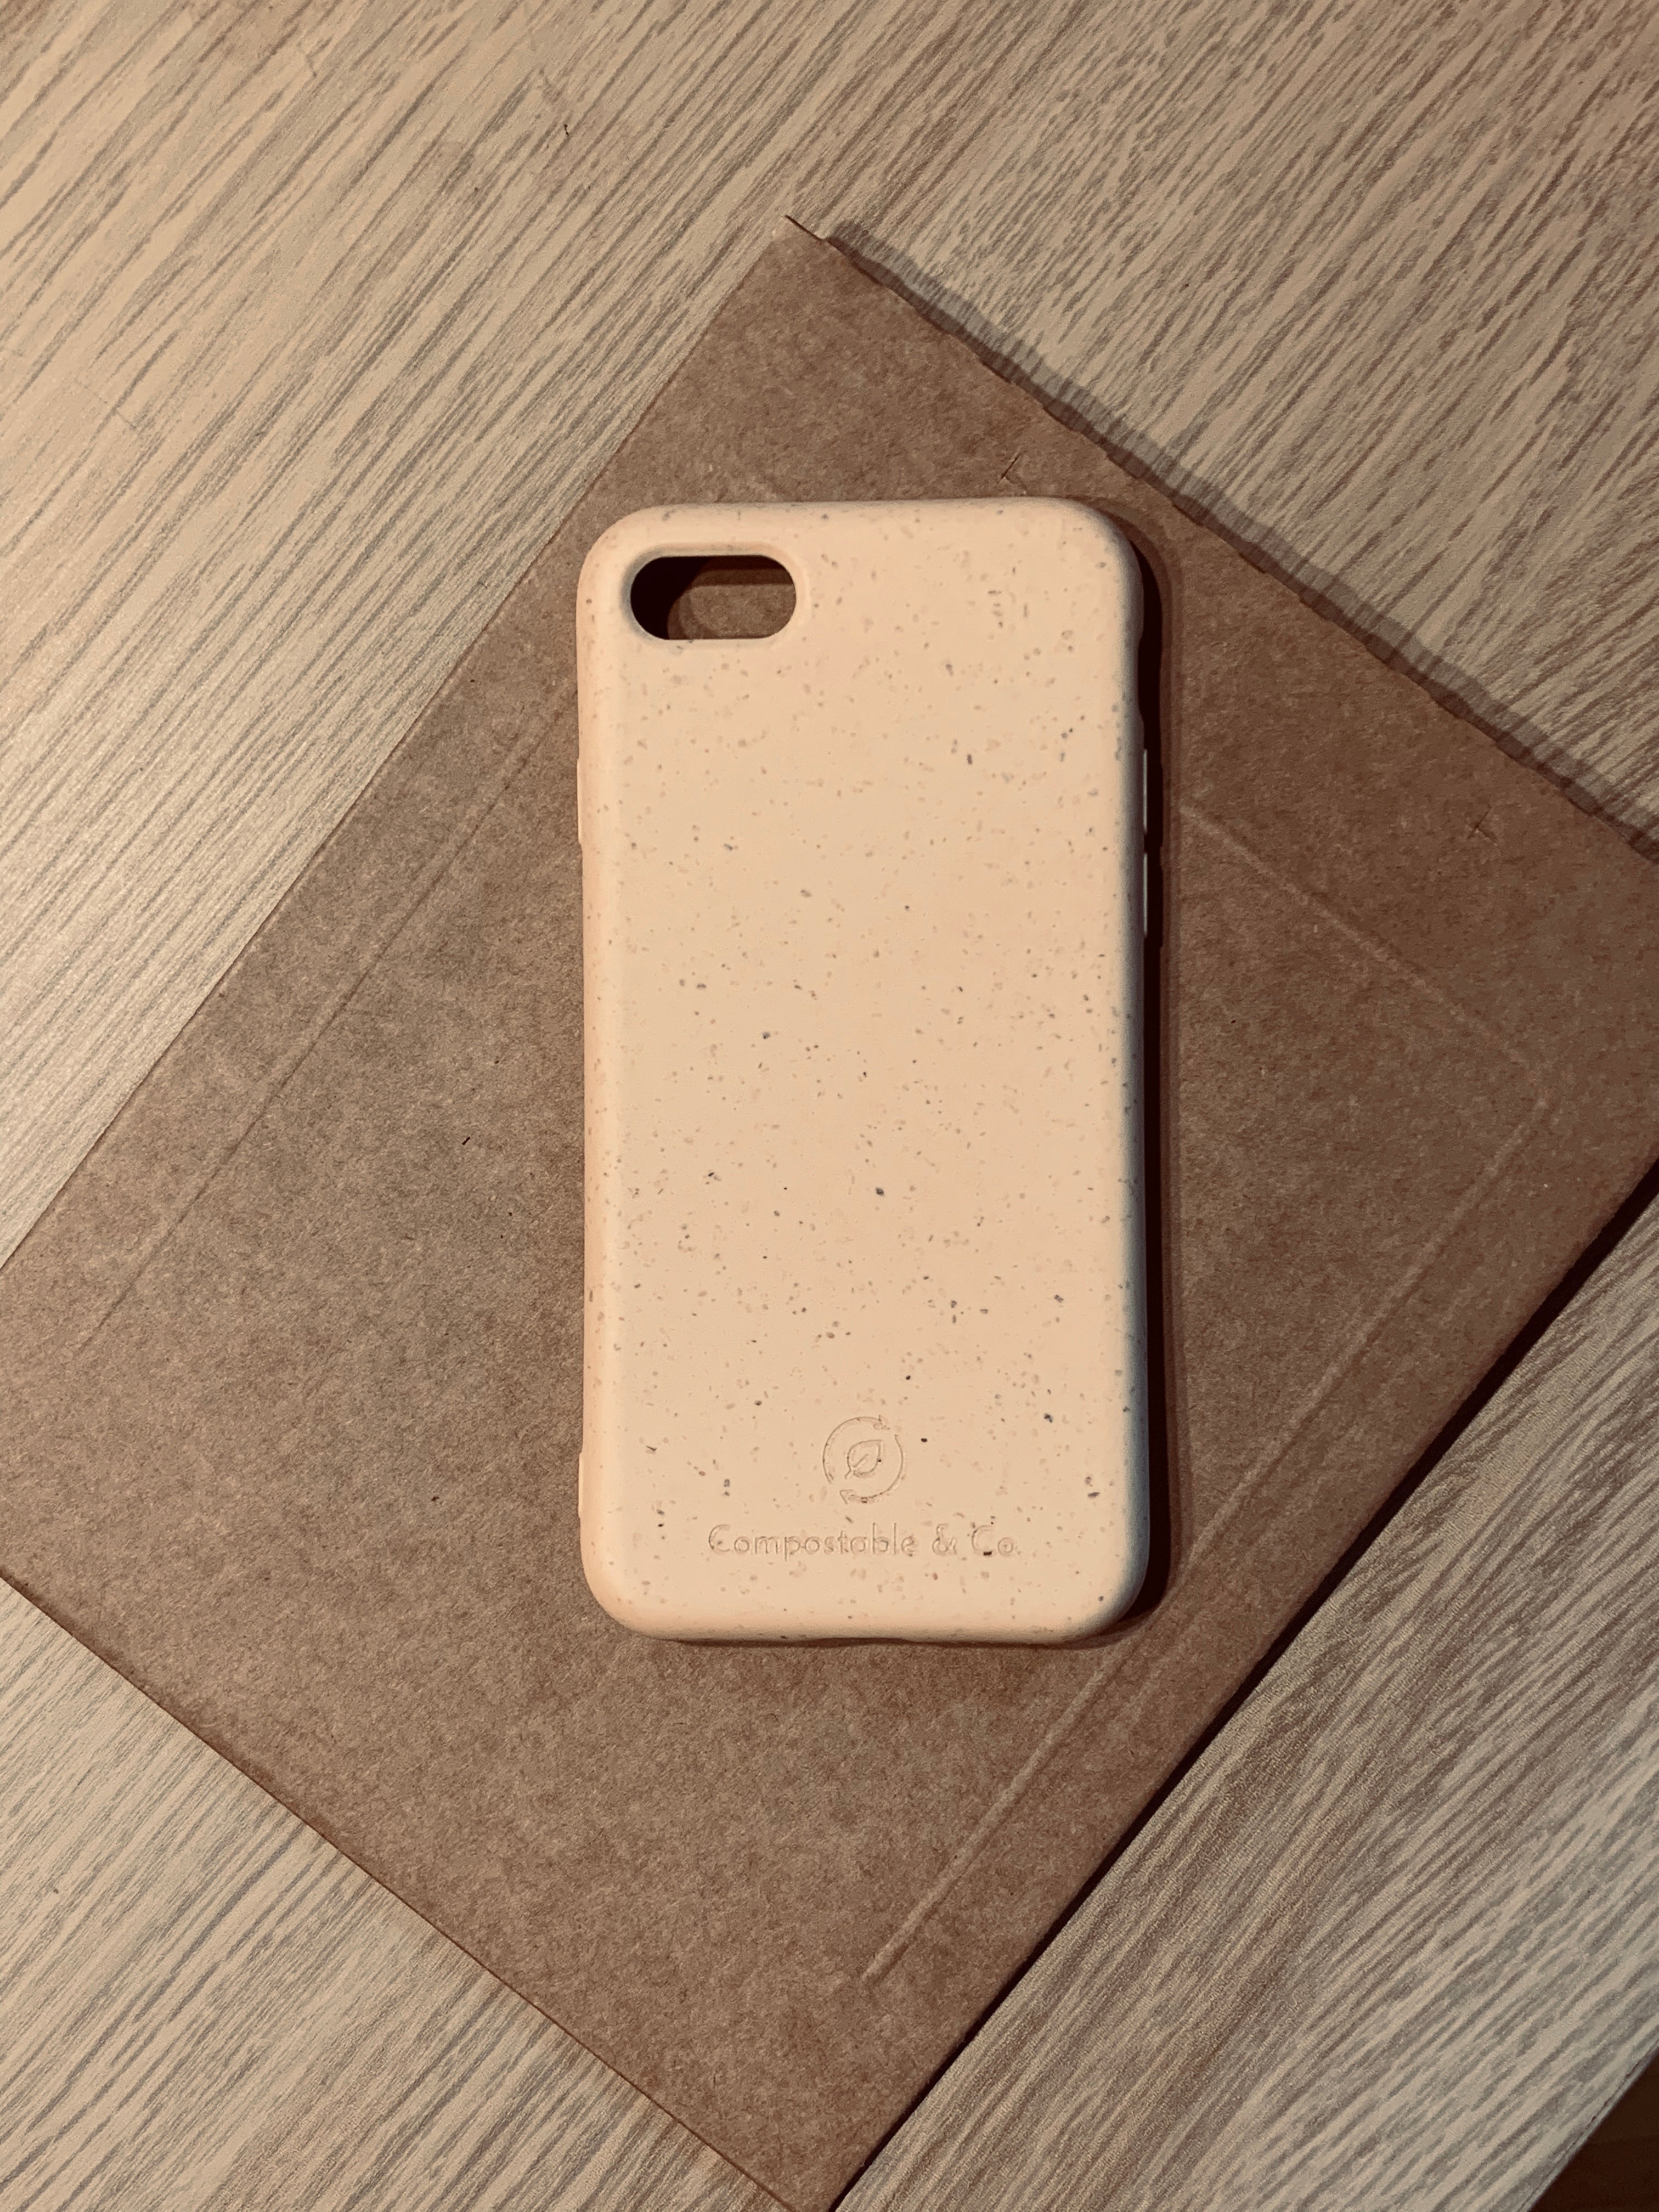 Compostable & Co. iPhone 7 / 8 / SE 2020 yellow biodegradable phone case with recycled paper background